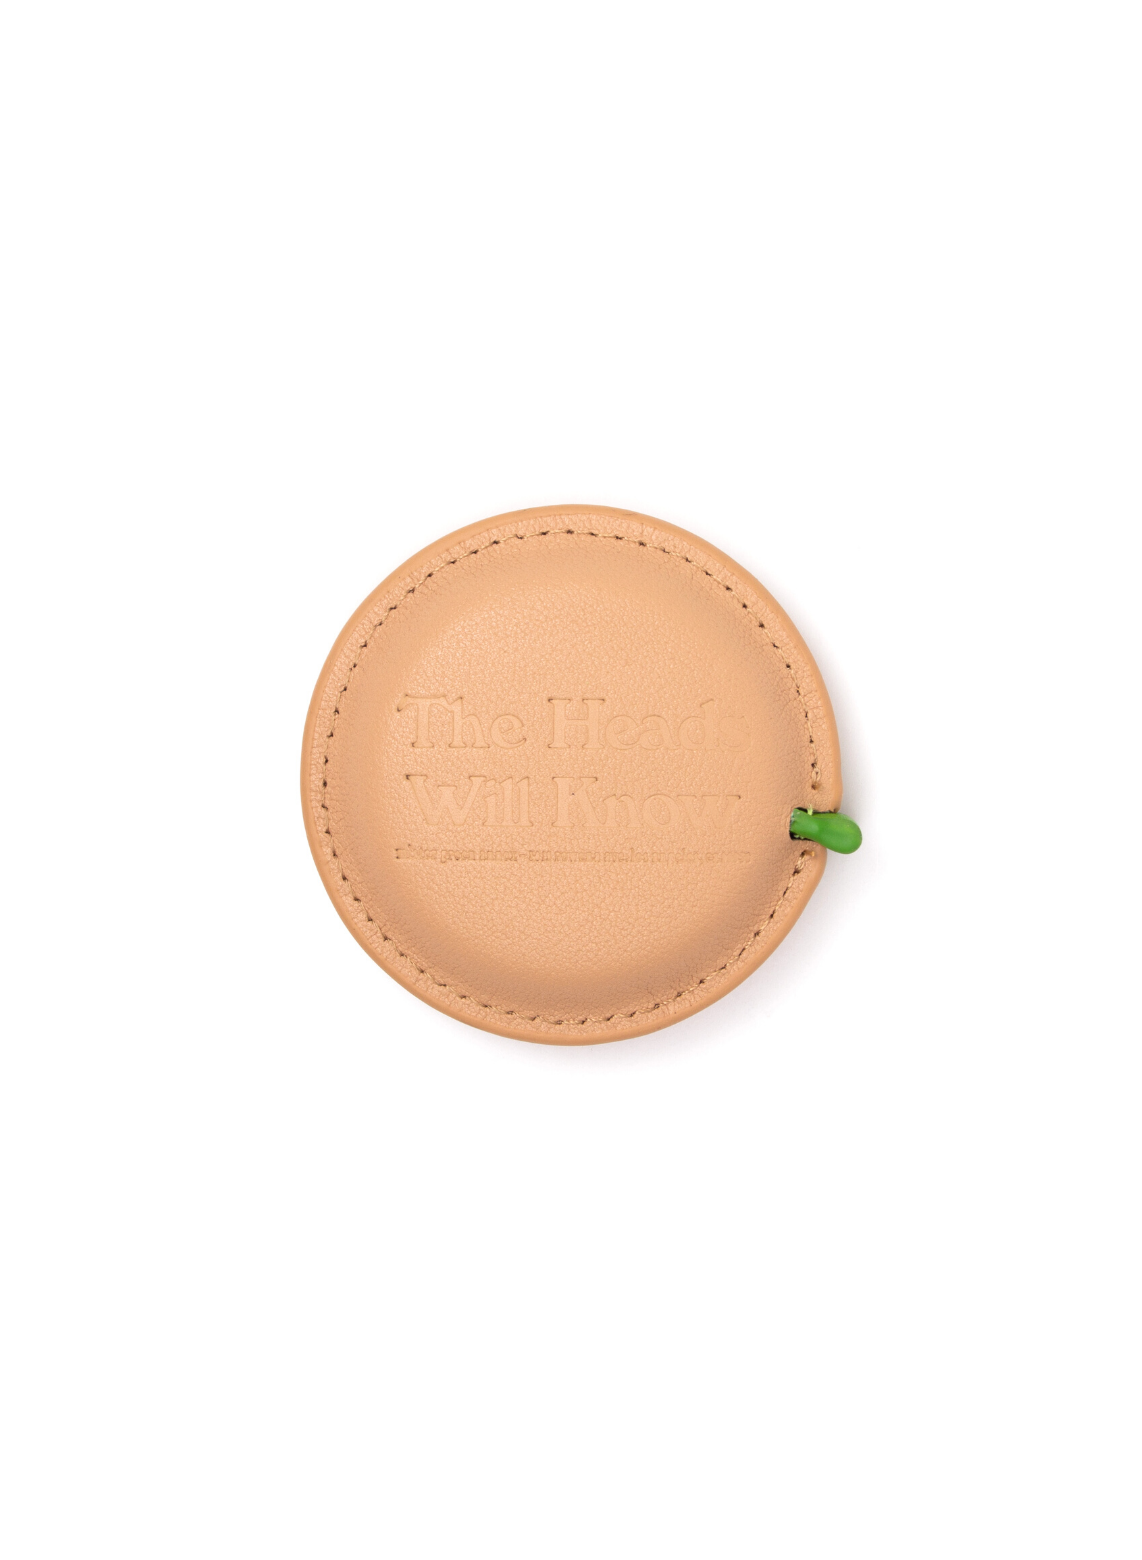 Retractable Leather Tape Measure - Natural-Mister Green-Mister Green